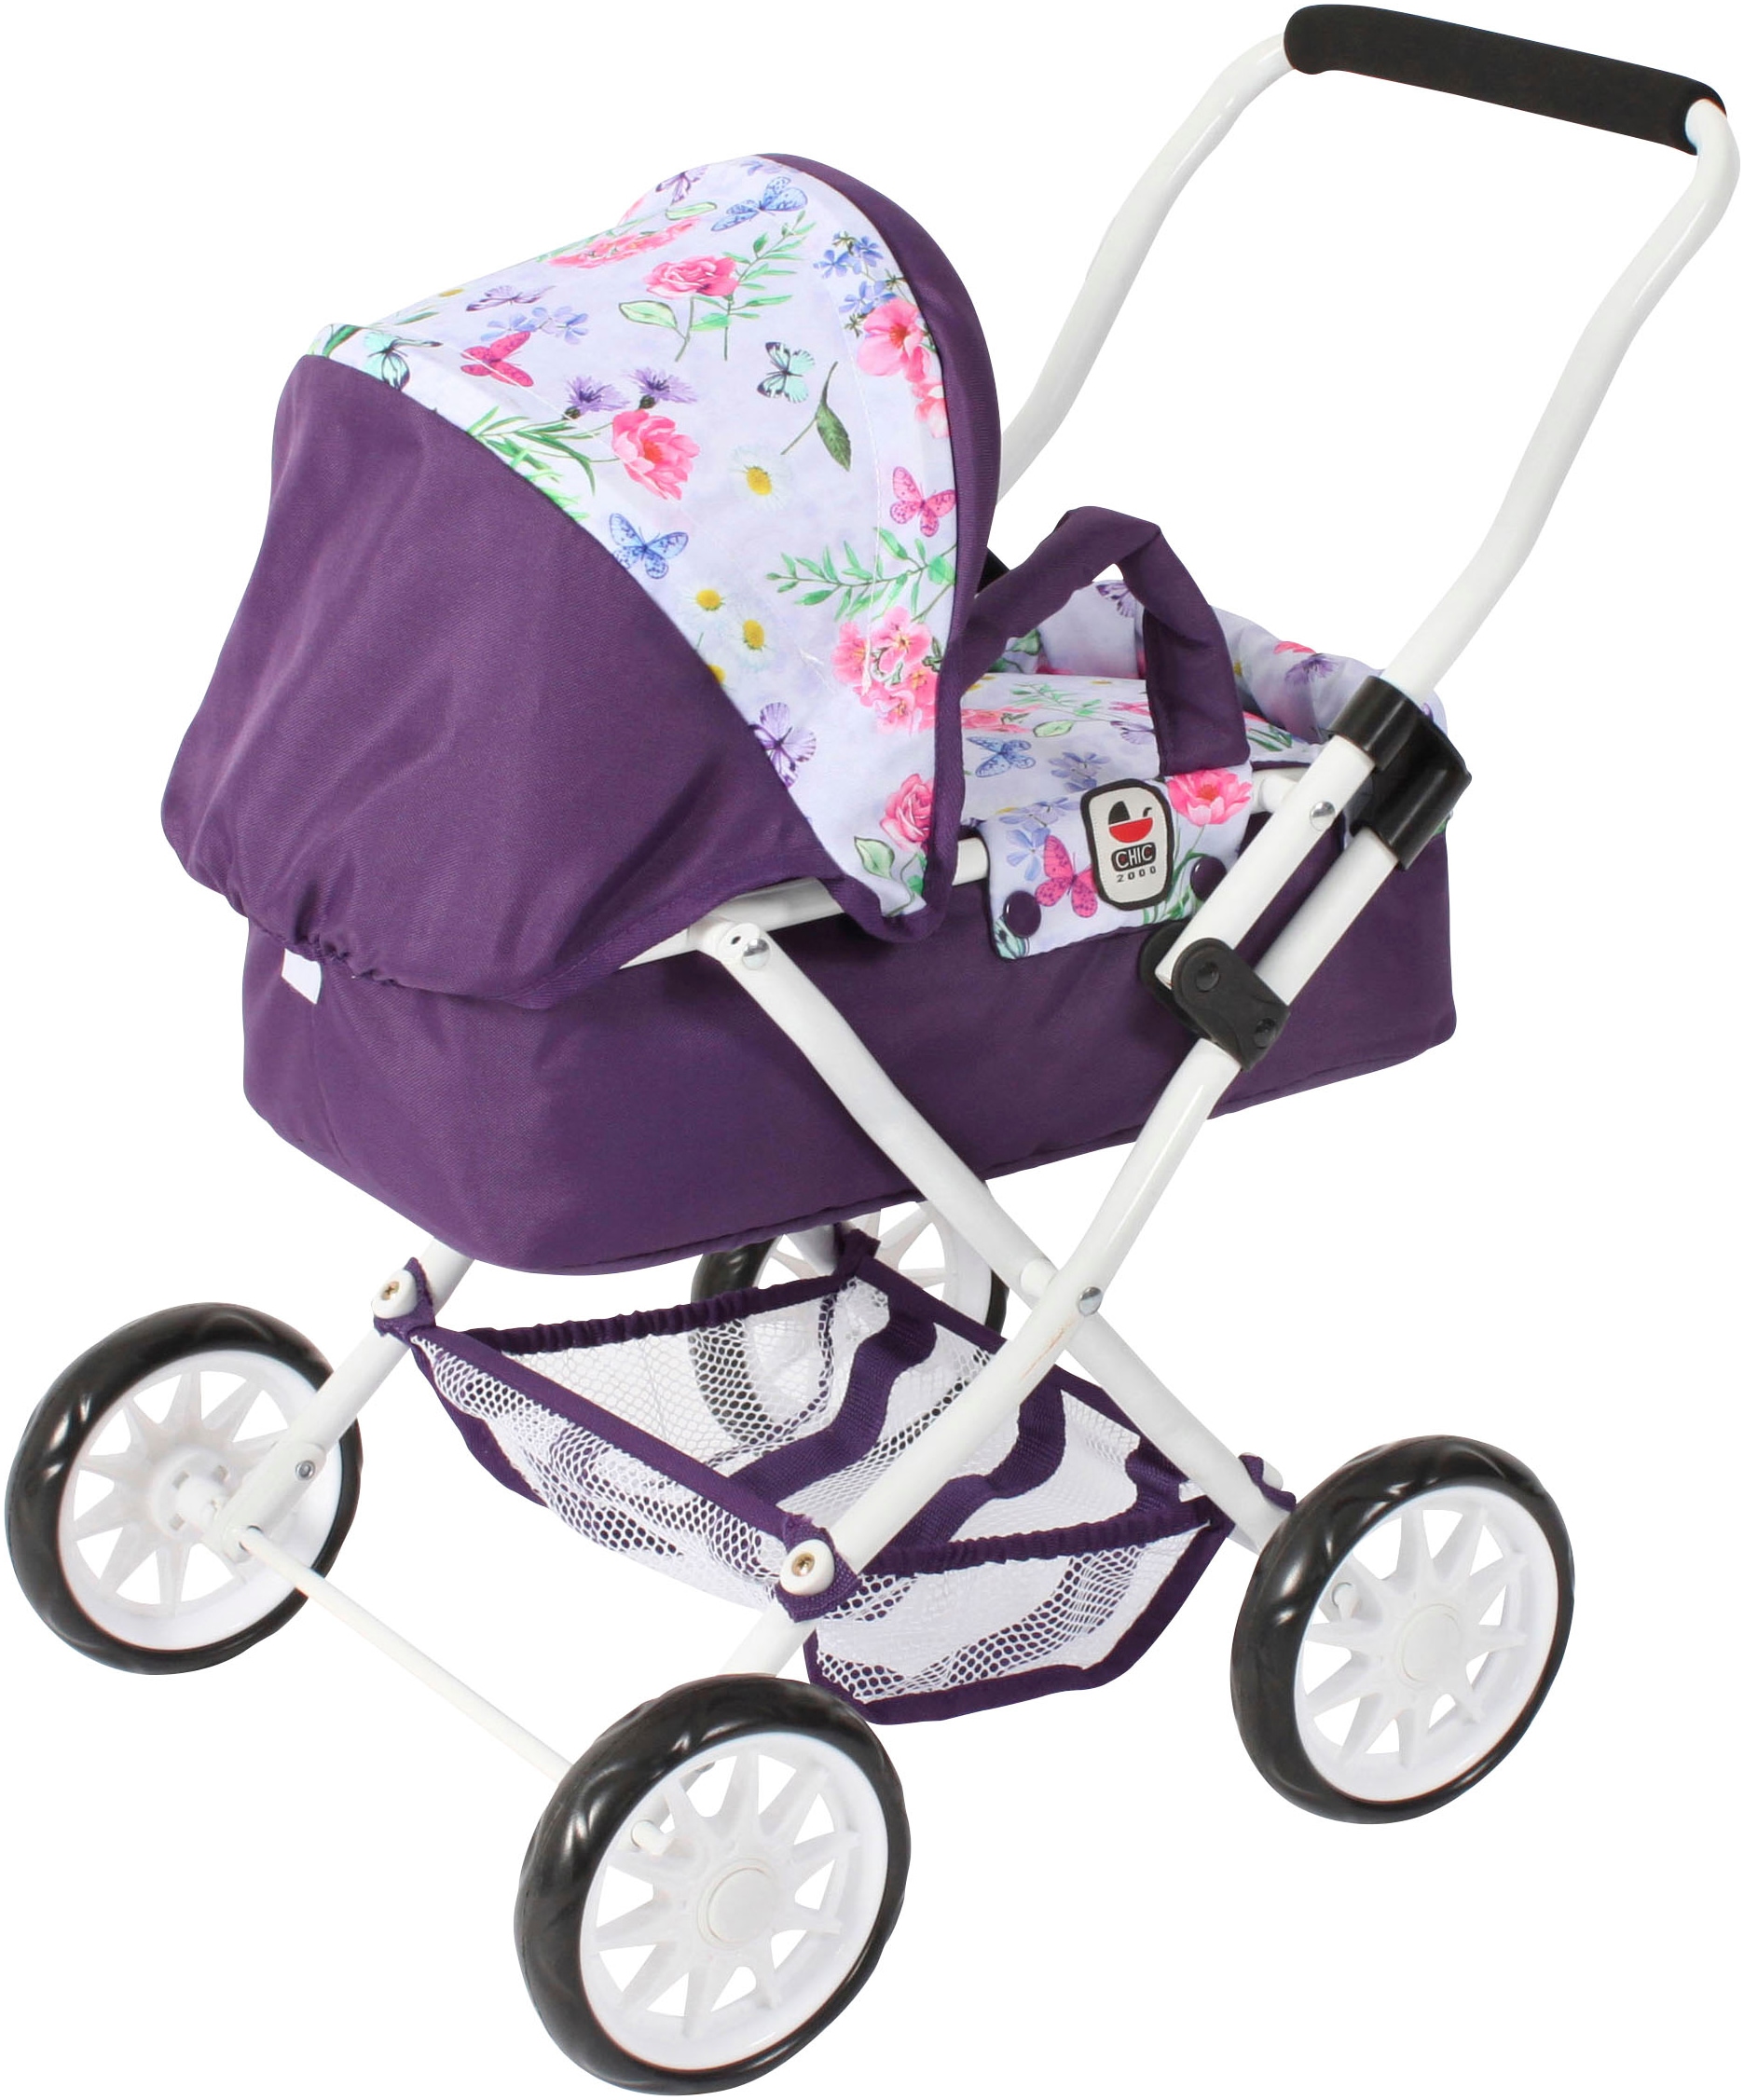 CHIC2000 Puppenwagen »Smarty, Flowers lila«